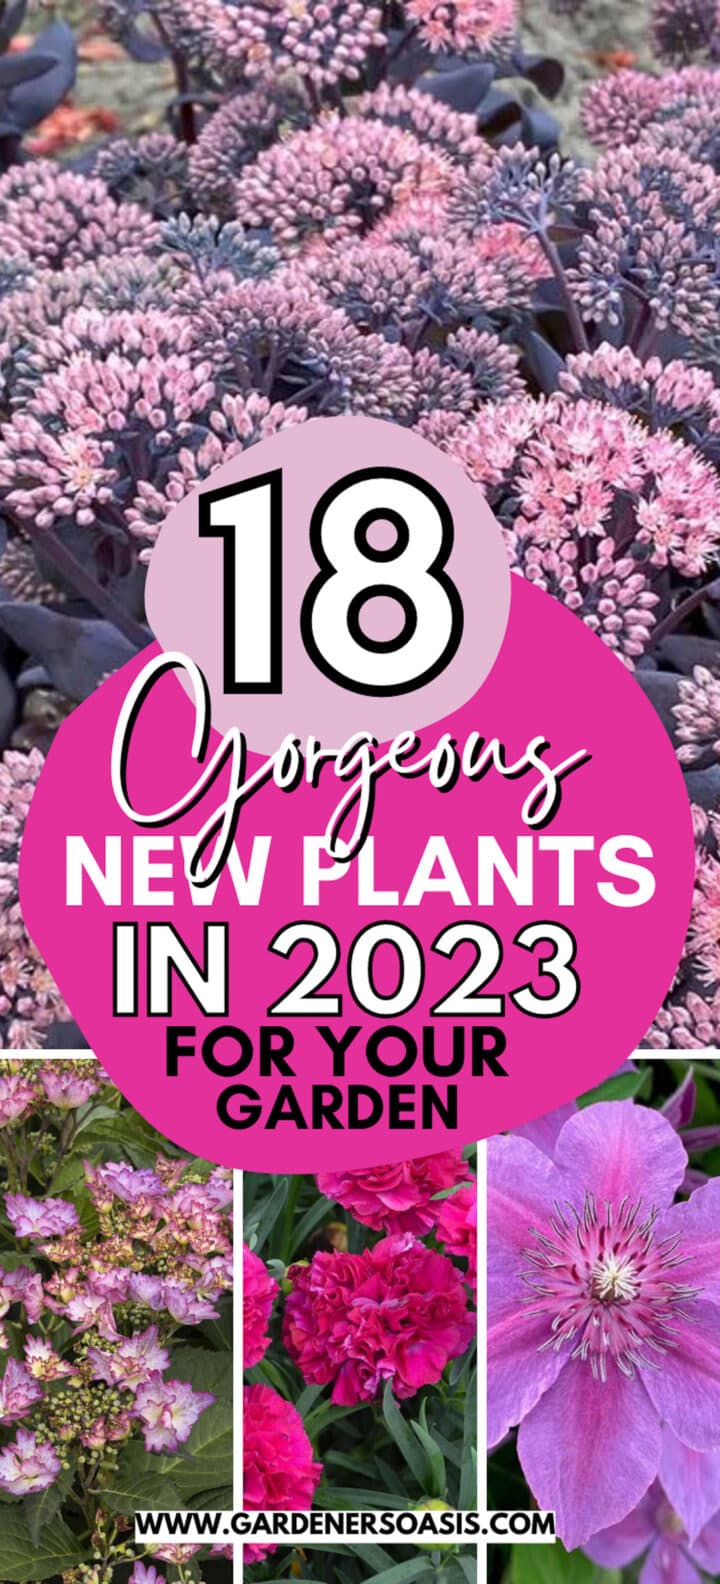 New Plants For 2023 (18 Of The Best New Perennials and Shrubs)